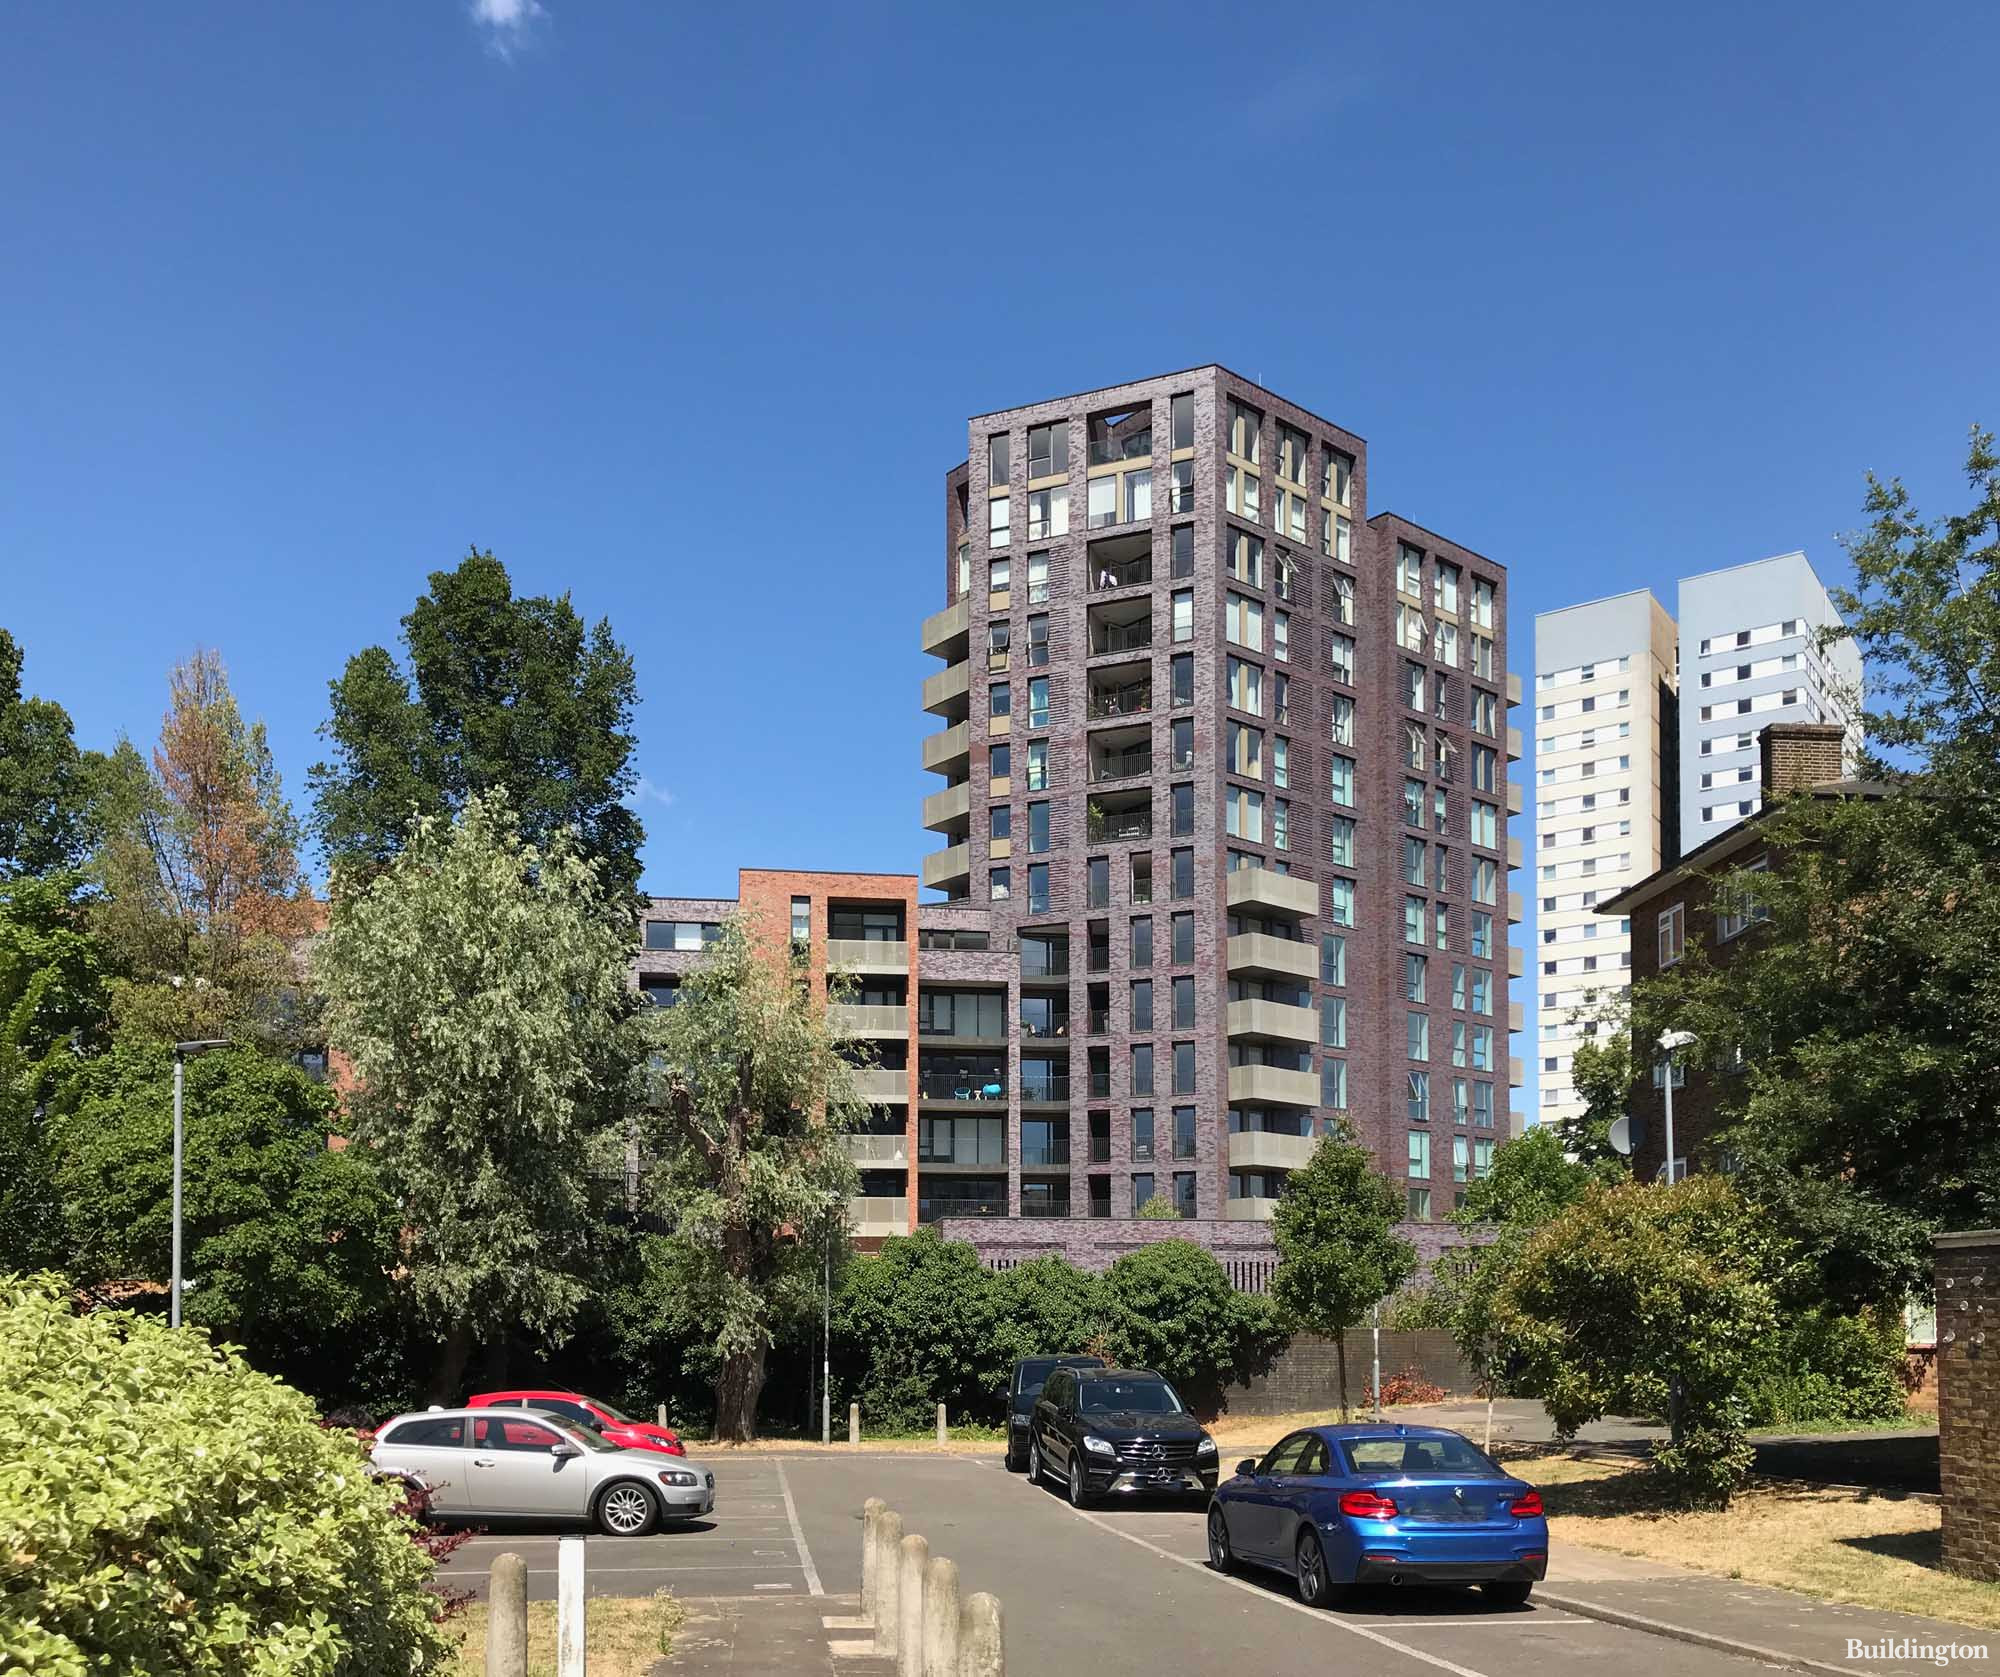 Abbey Area tower from Abbey Wood Estate in London NW8.